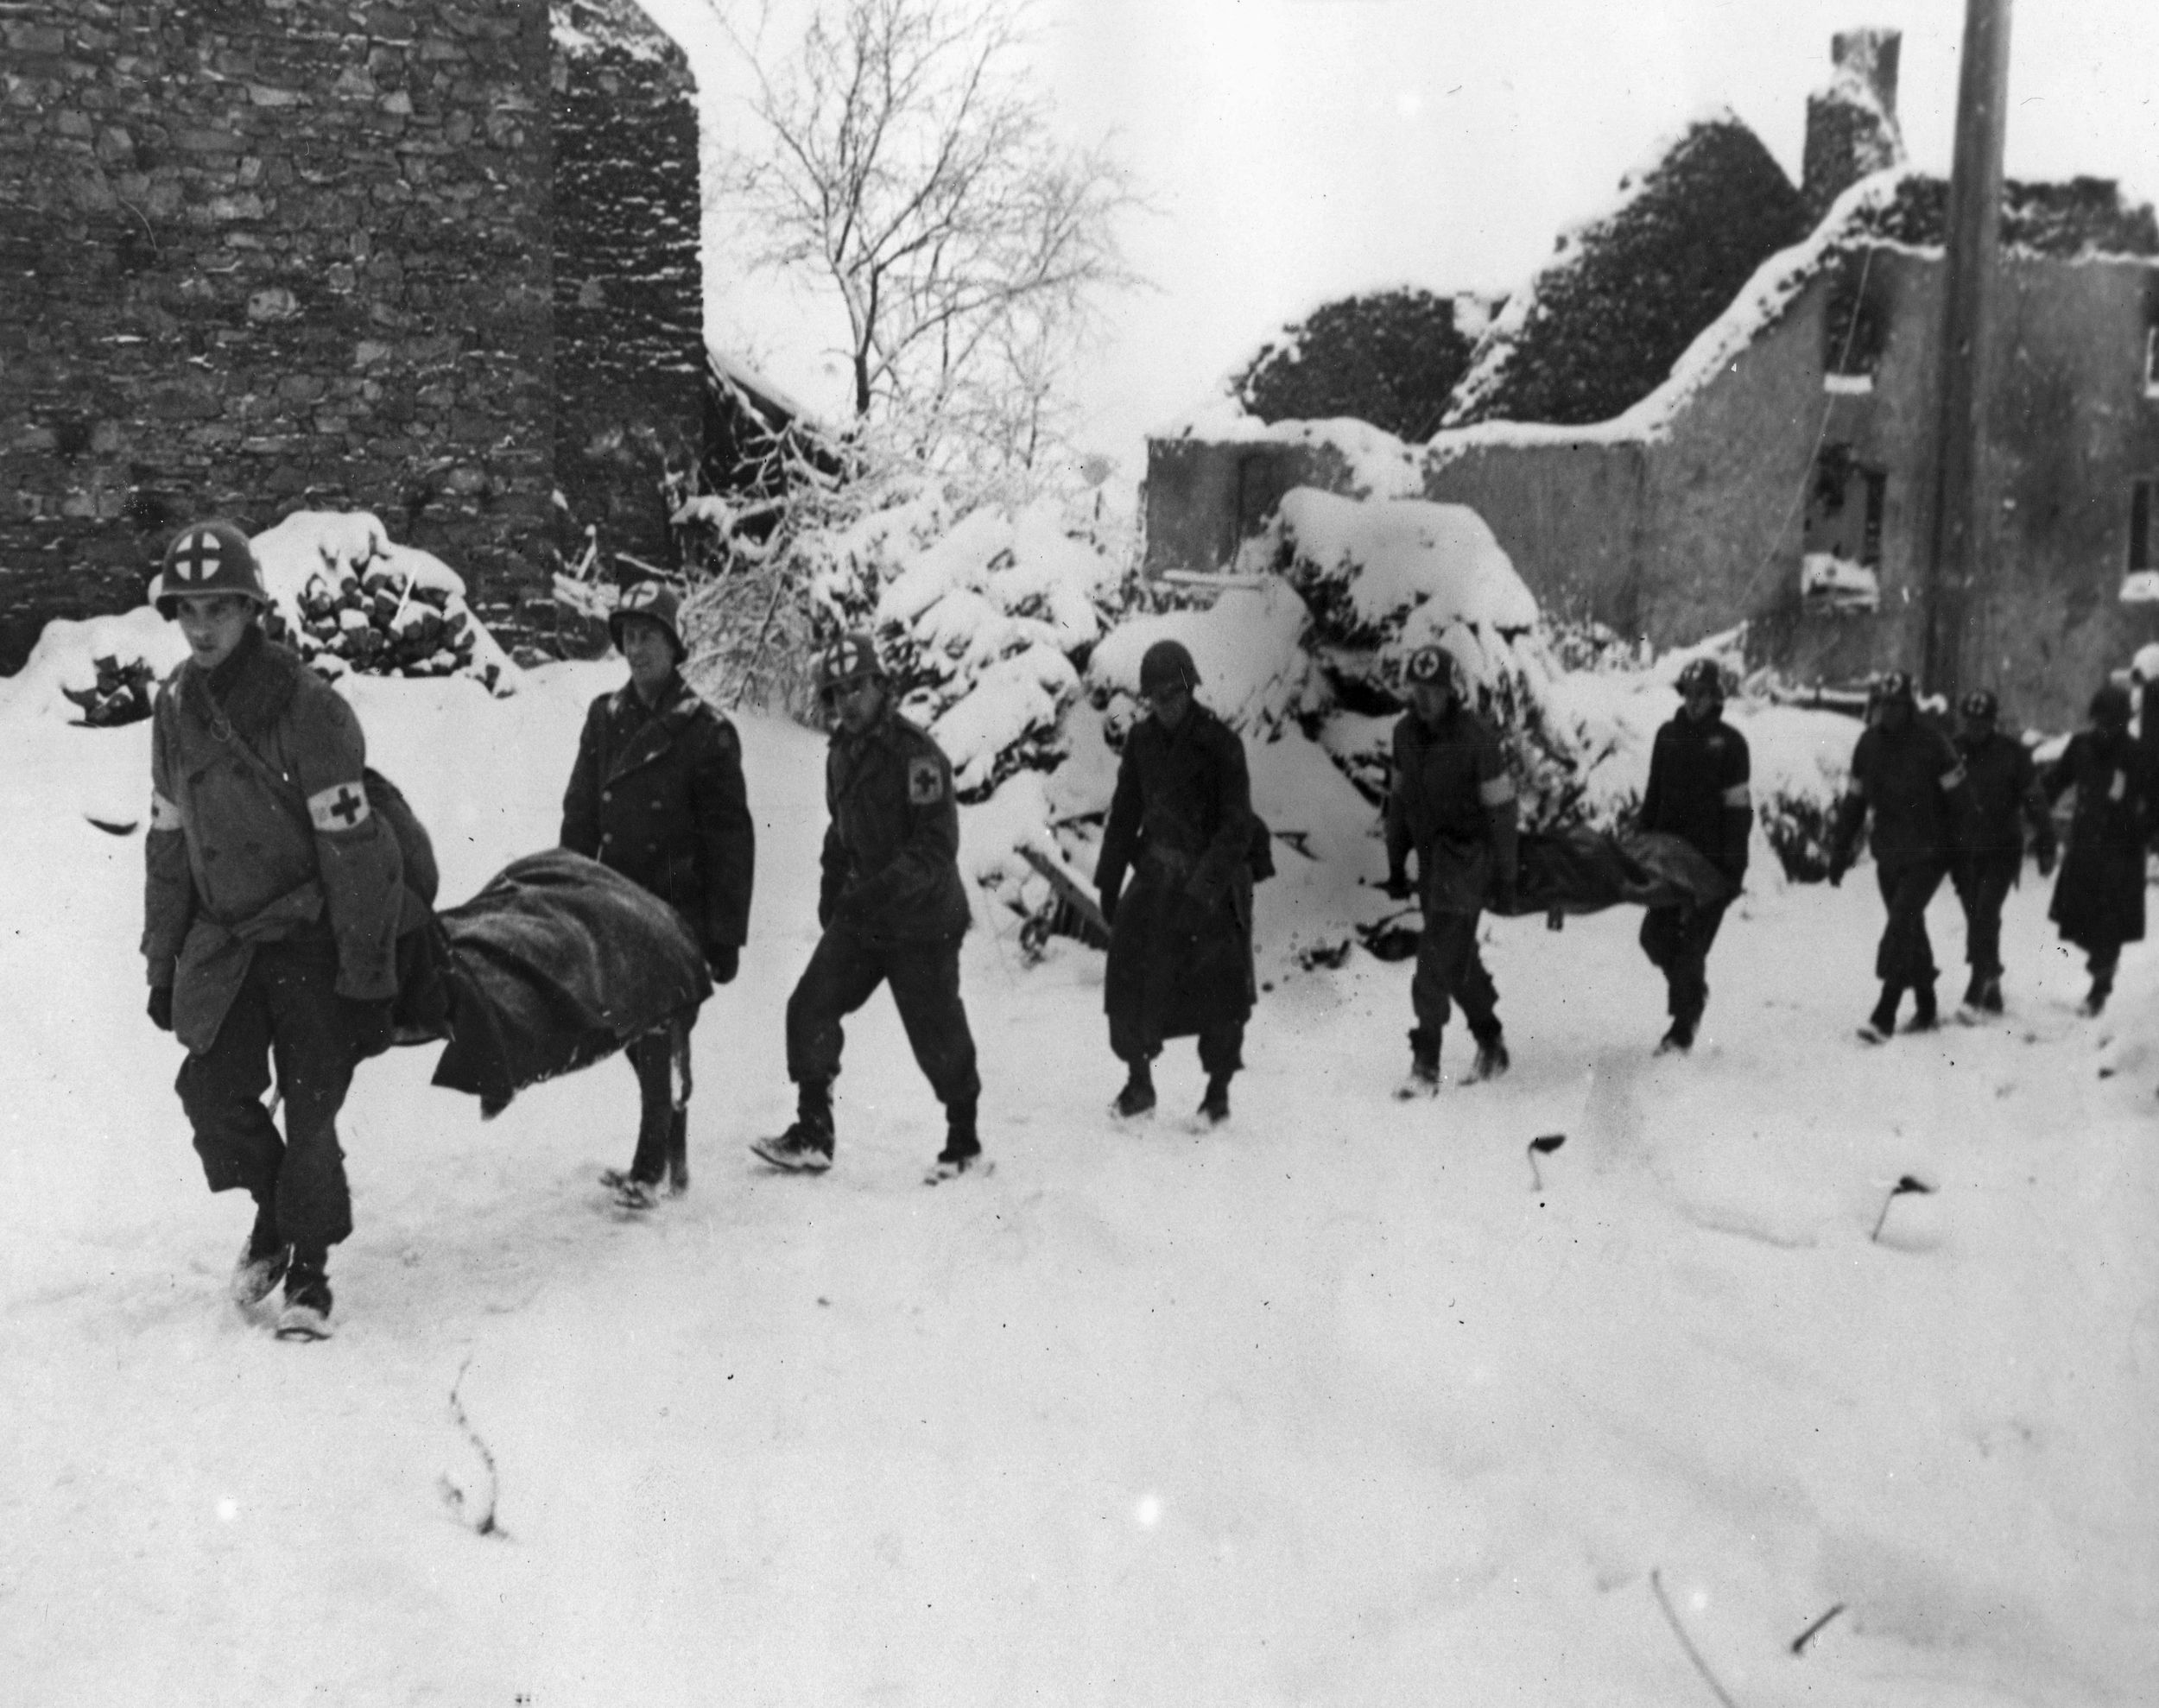 Medical personnel of the U.S. 35th Infantry Division carry litters of wounded soldiers toward the rear near the snow-covered town of Lutrebois, Belgium.